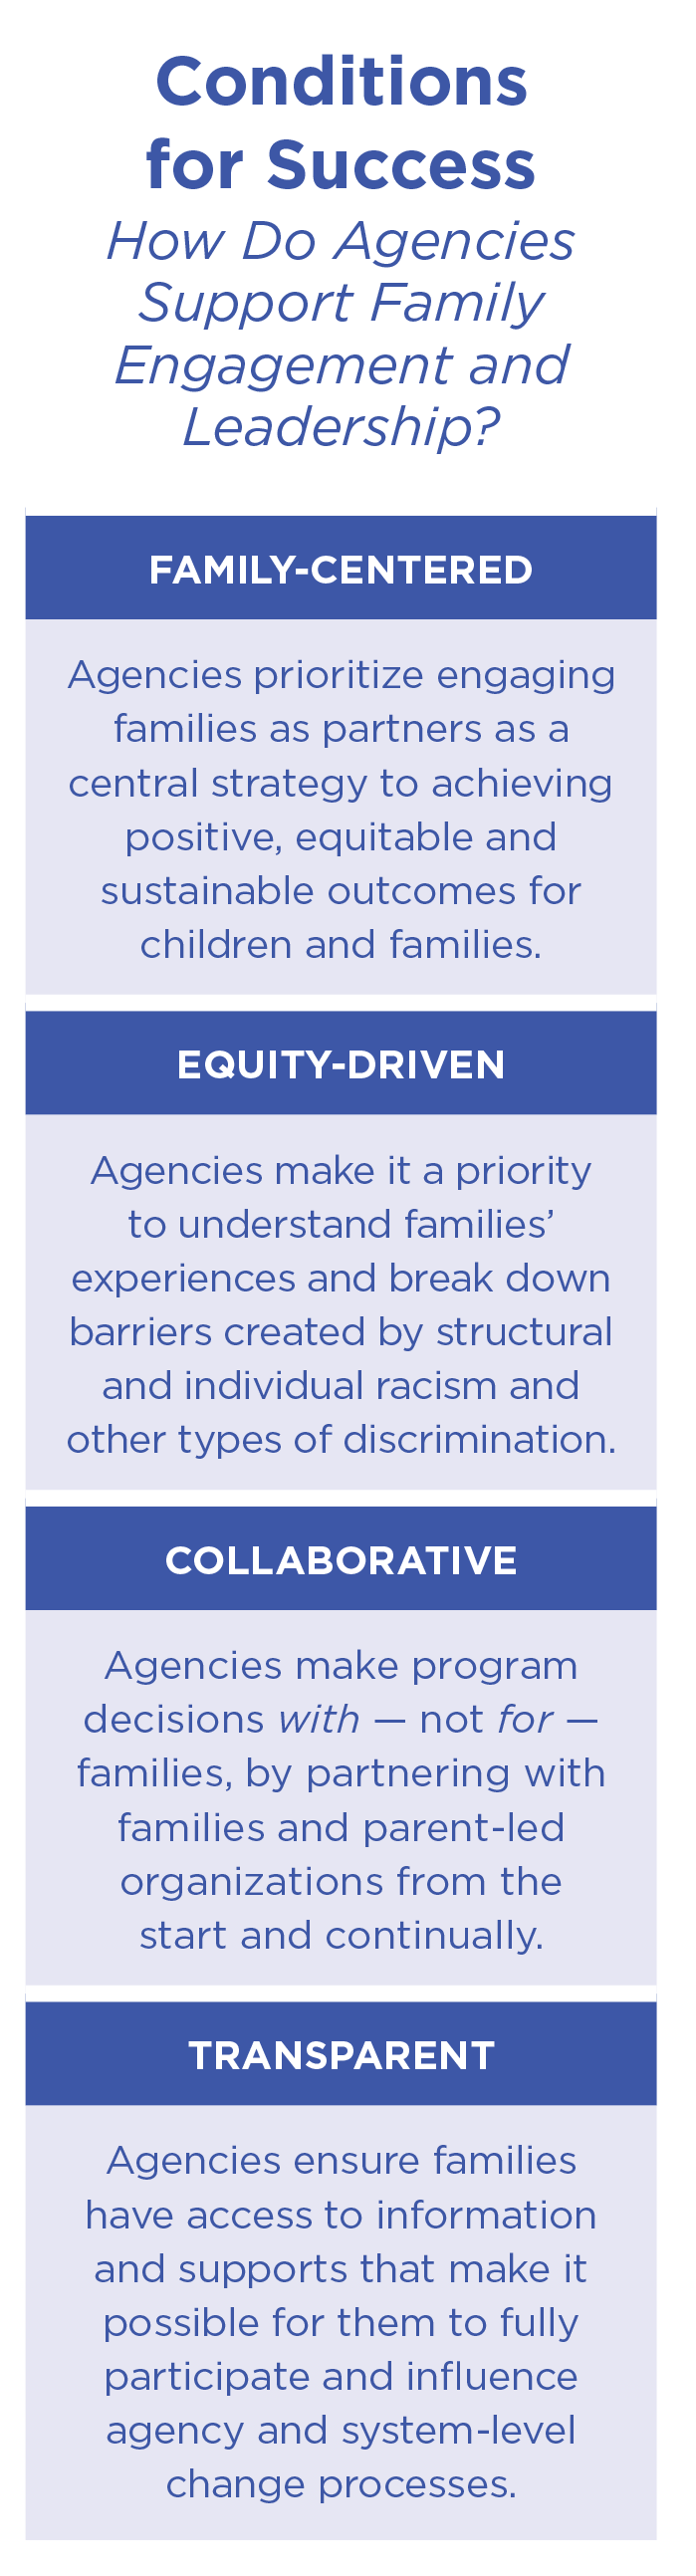 FAMILY-CENTERED Agencies prioritize engaging families as partners as a central strategy to achieving positive, equitable and sustainable outcomes for children and families. EQUITY-DRIVEN Agencies make it a priority to understand families’ experiences and break down barriers created by structural and individual racism and other types of discrimination. COLLABORATIVE Agencies make program decisions with — not for —families, by partnering with families and parent-led organizations from thestart and continually. TRANSPARENT Agencies ensure families have access to information and supports that make it possible for them to fully participate and influence agency and system-level change processes.